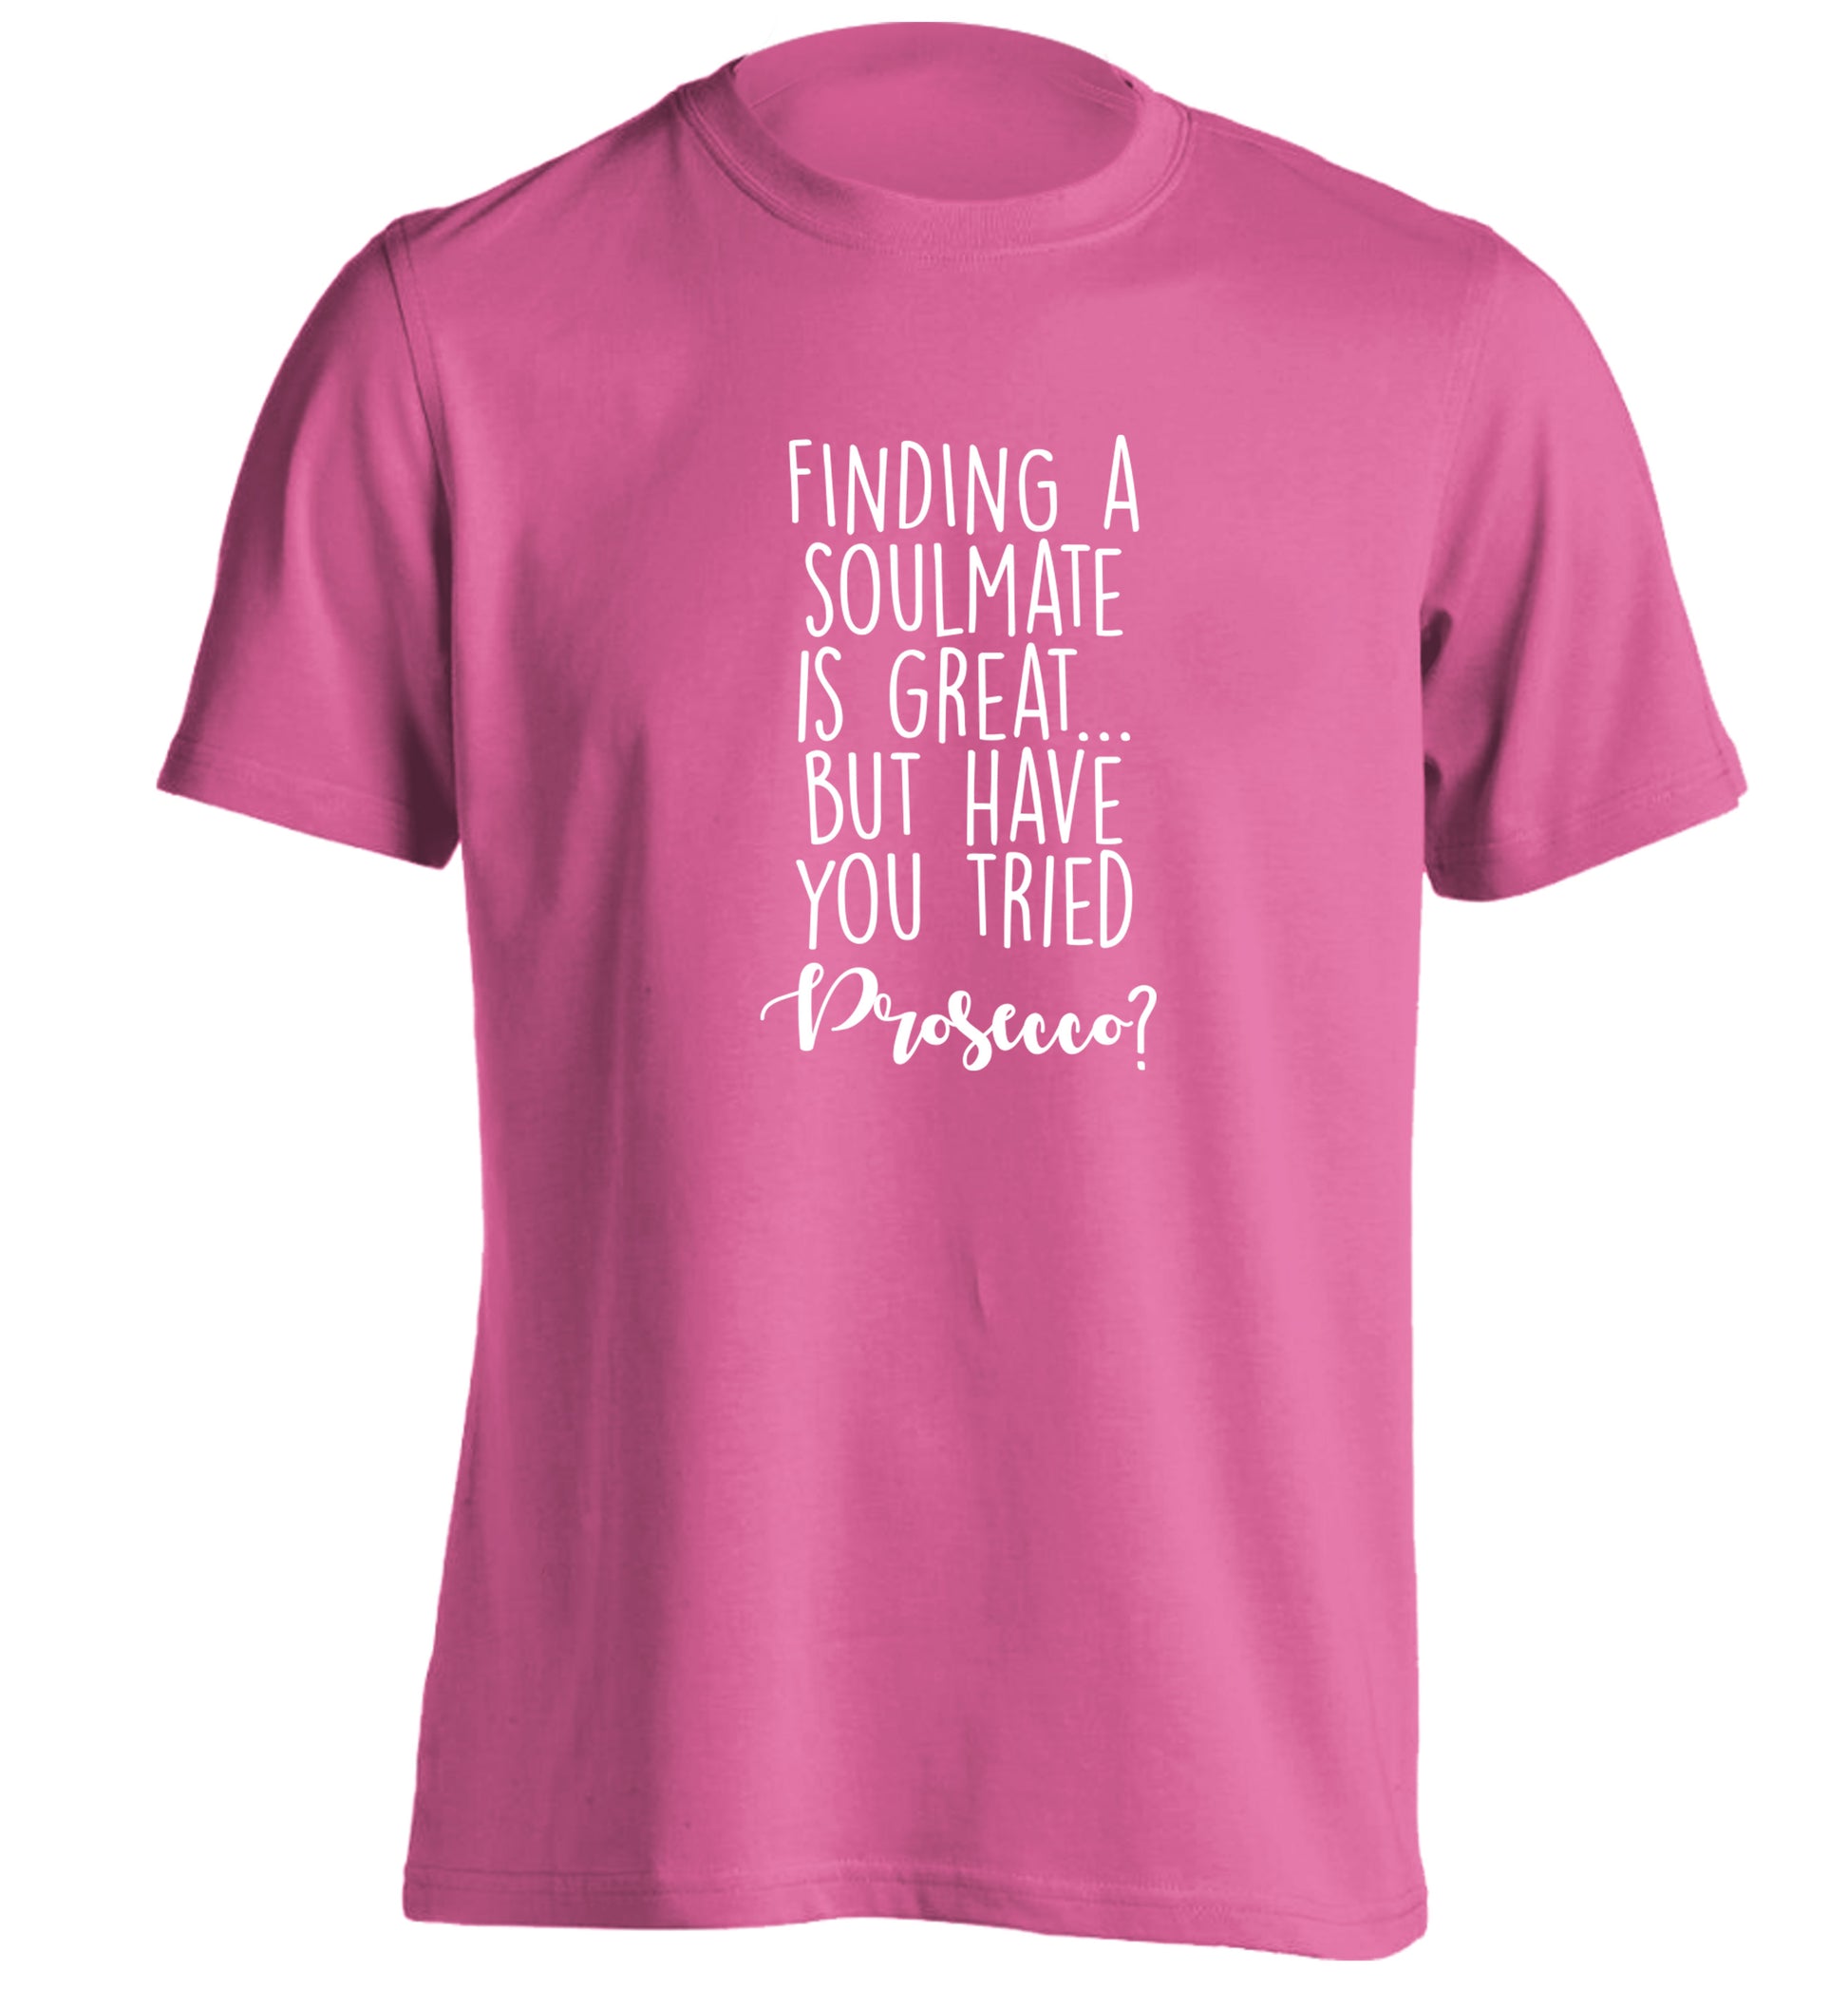 Finding a soulmate is great but have you tried prosecco? adults unisex pink Tshirt 2XL